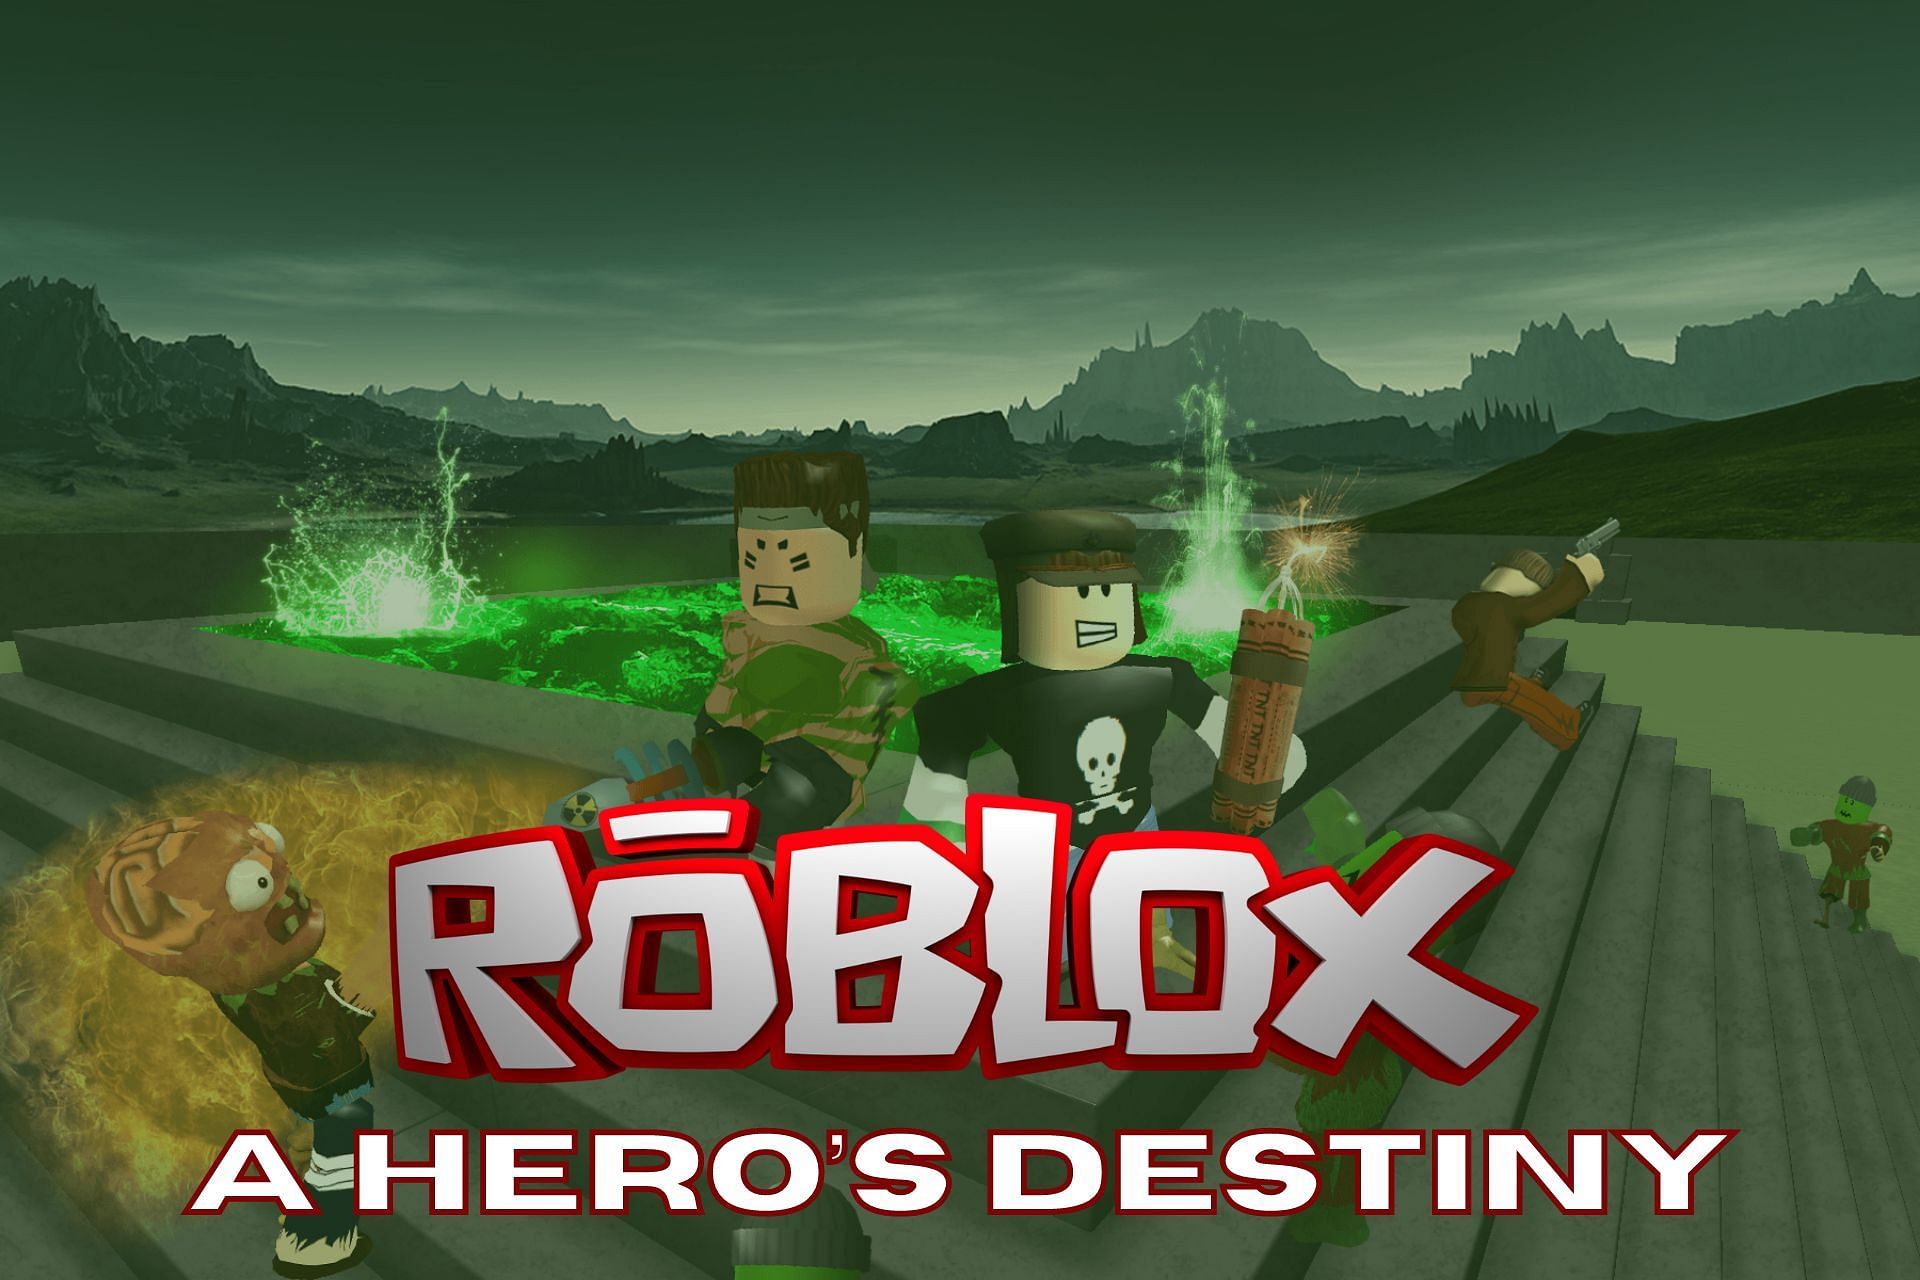 A Hero’s Destiny codes in Roblox Free spins (April 2022)